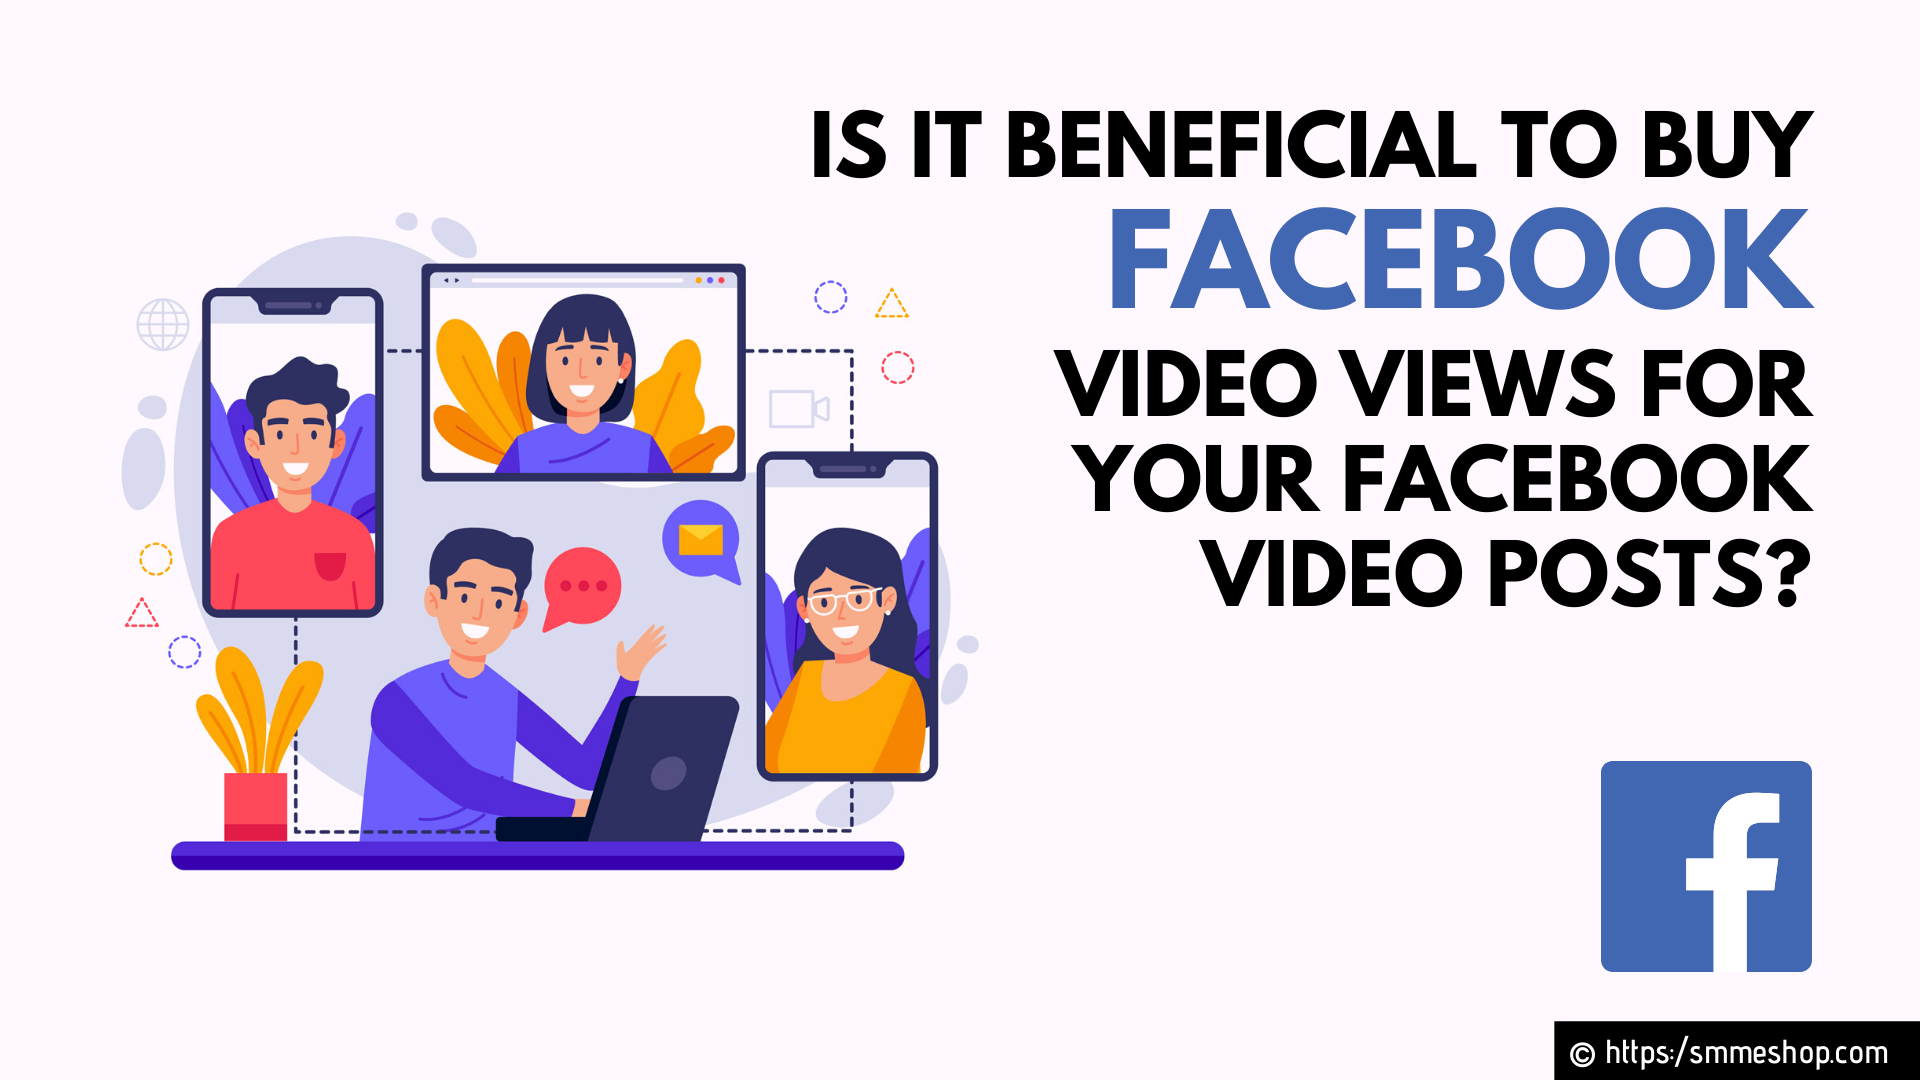 Is it Beneficial to Buy Facebook Video Views for your Facebook Video Posts?